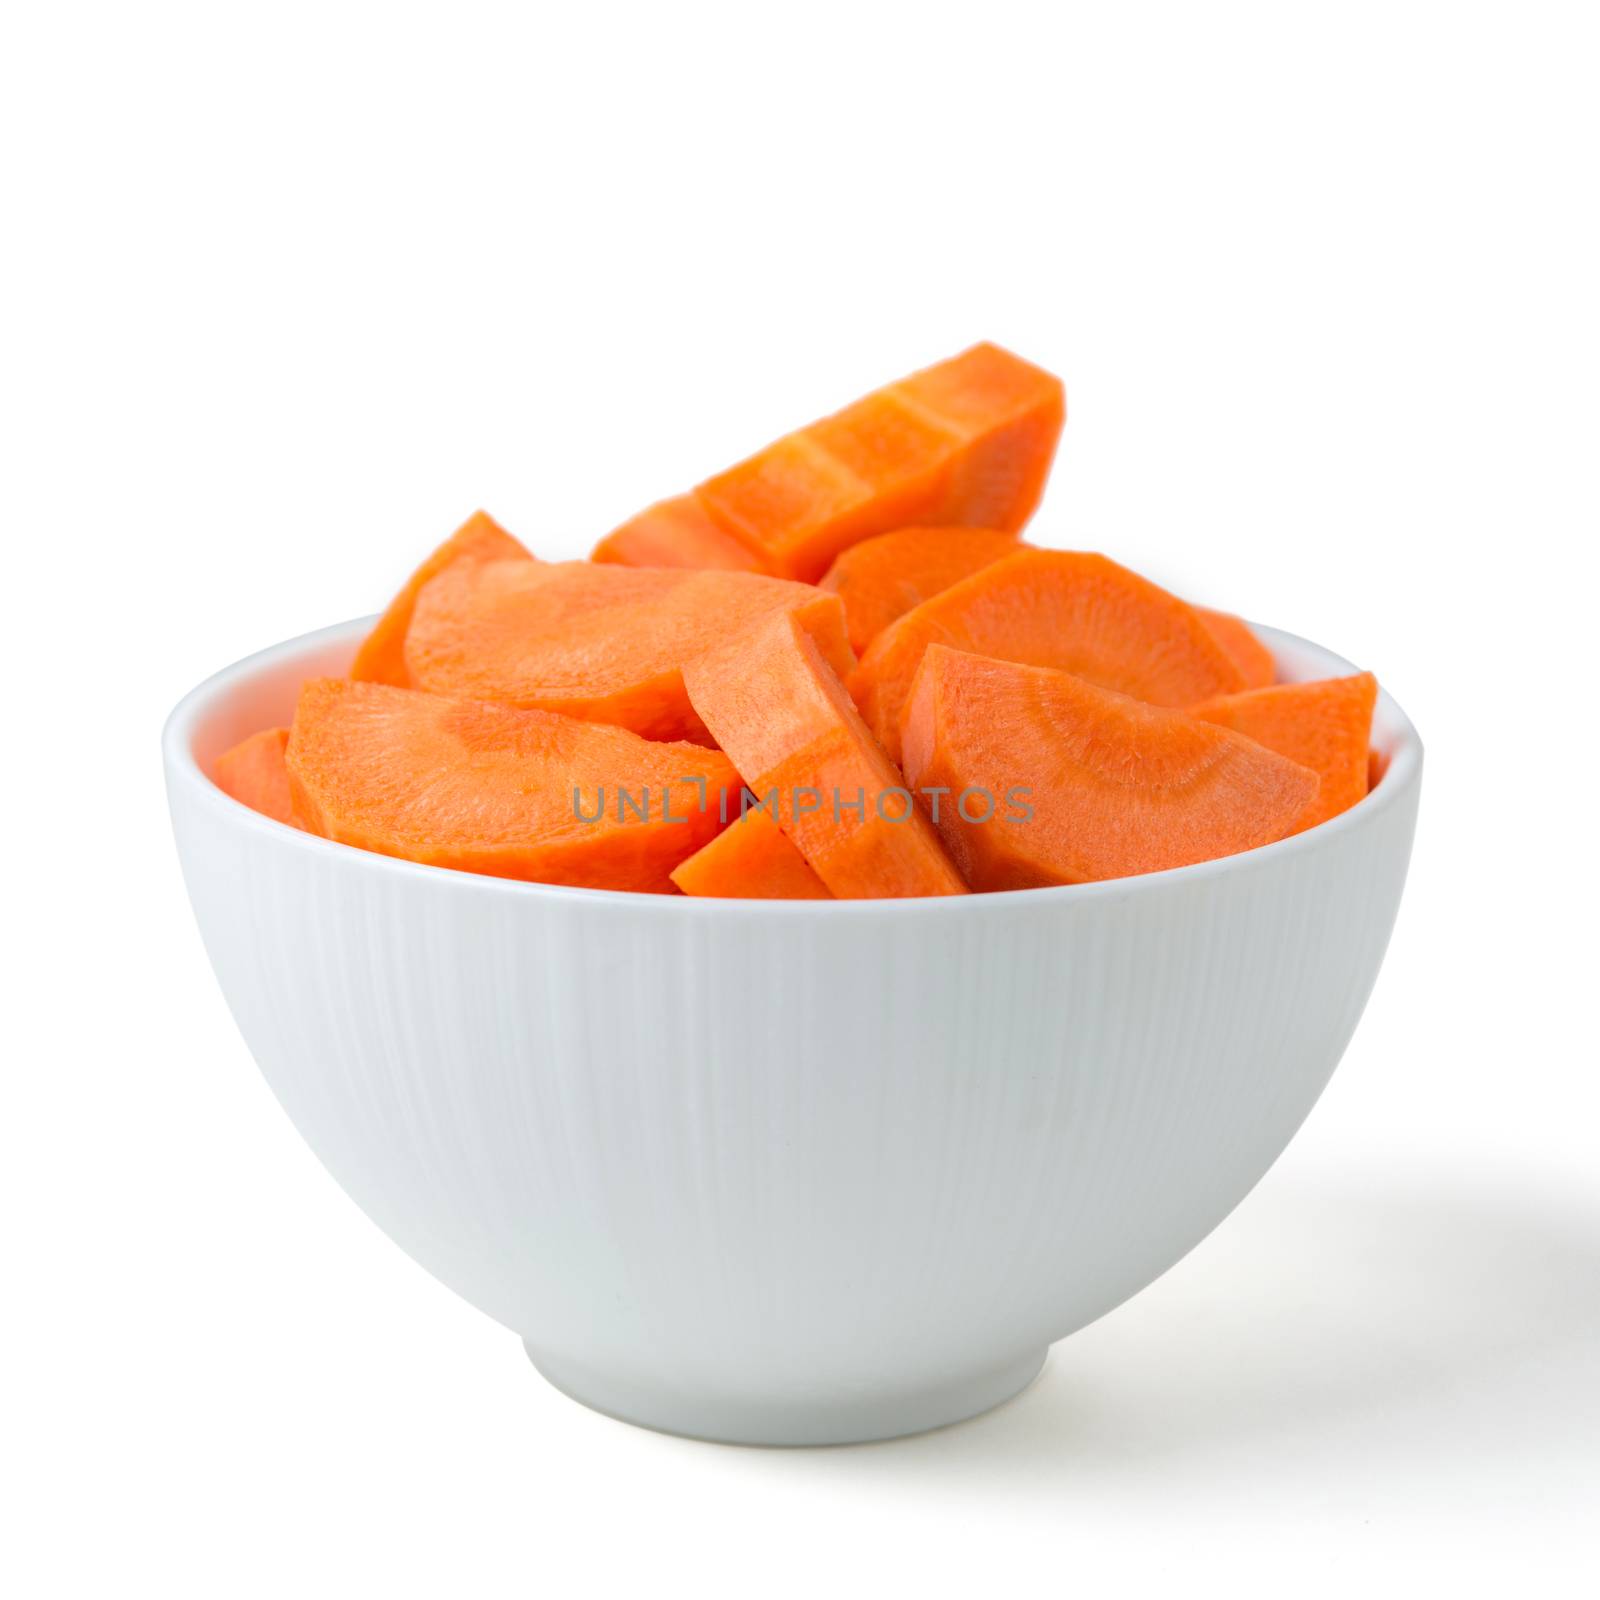 sliced carrots in bowl isolated on white